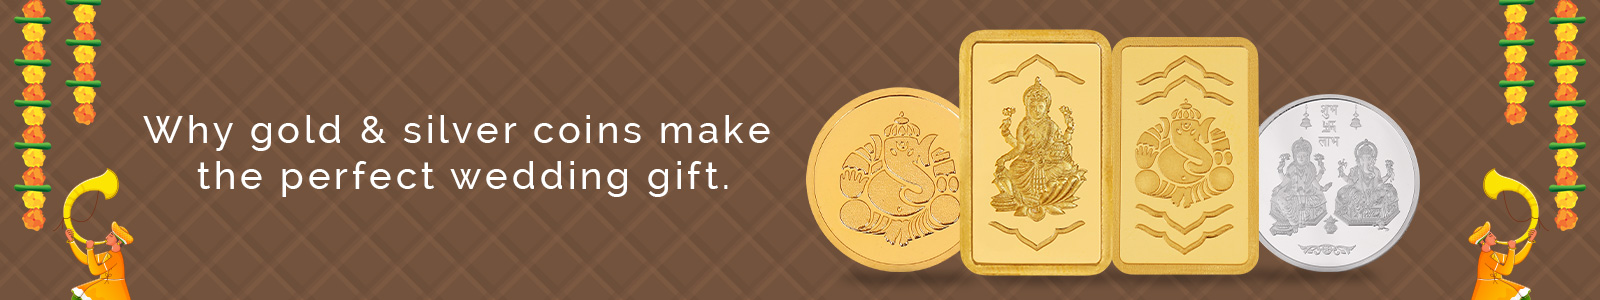 Why gold & silver coins make the perfect wedding gift.